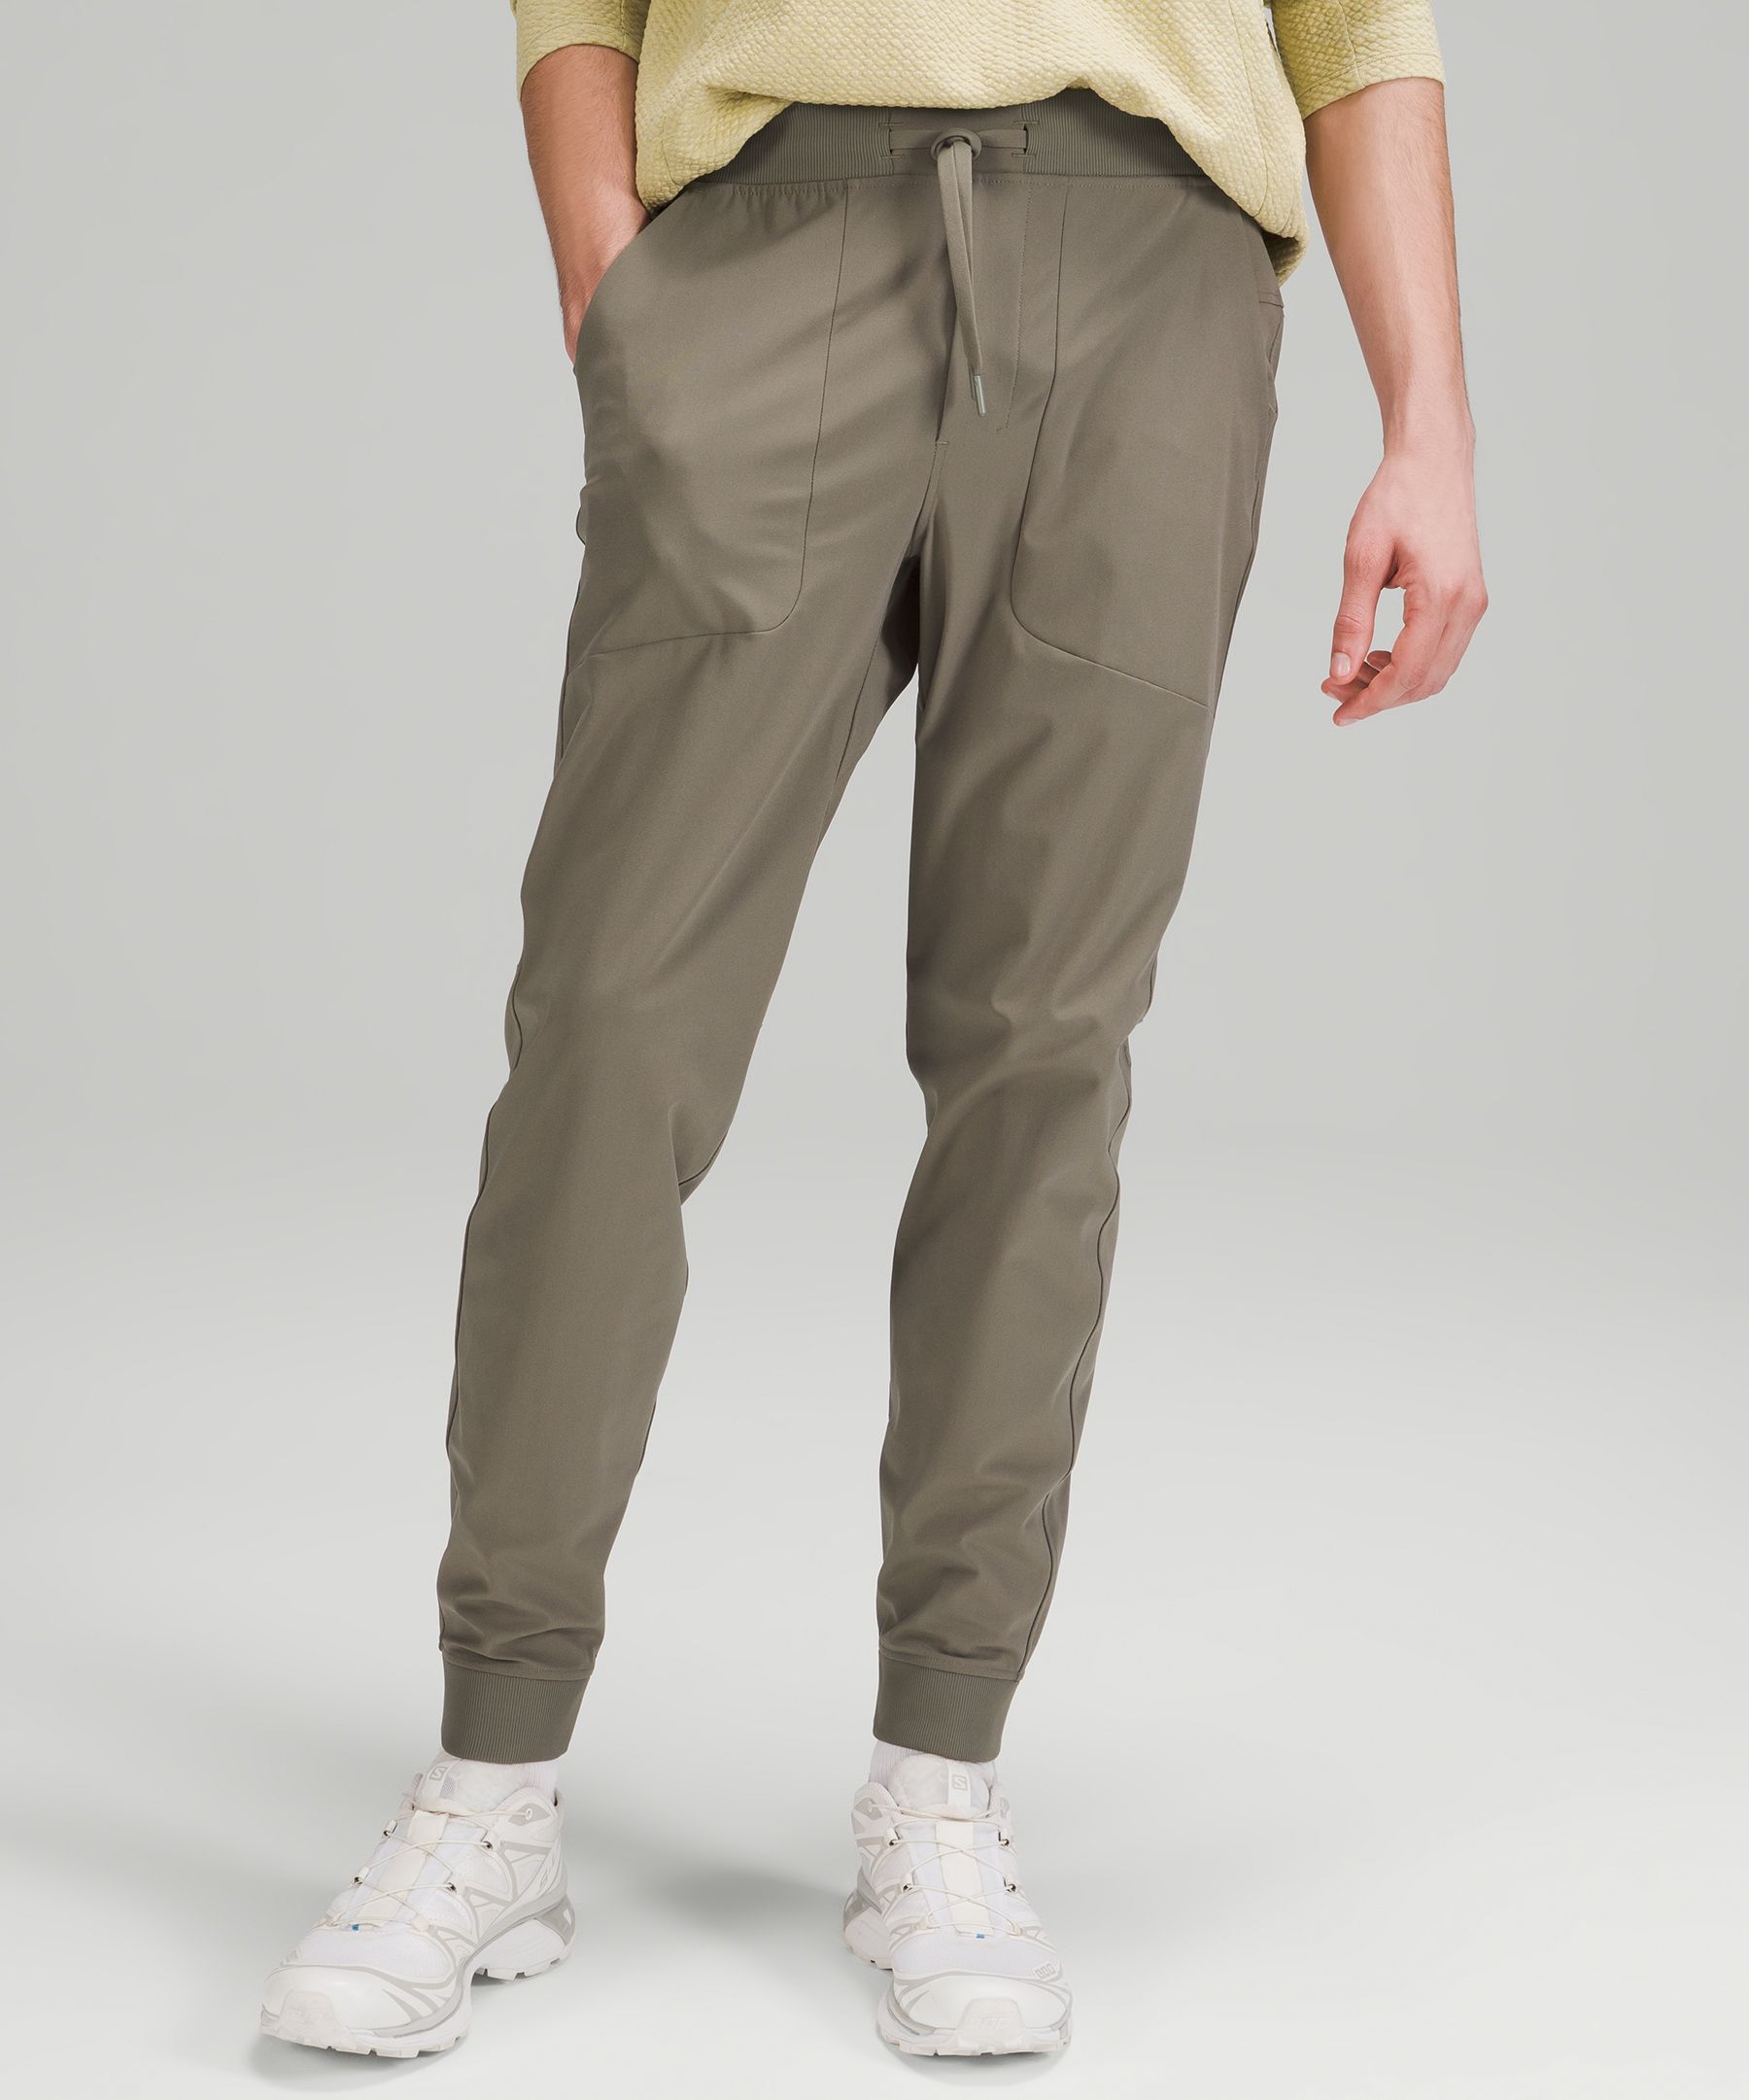 Lululemon Abc Joggers Warpstreme In Rover